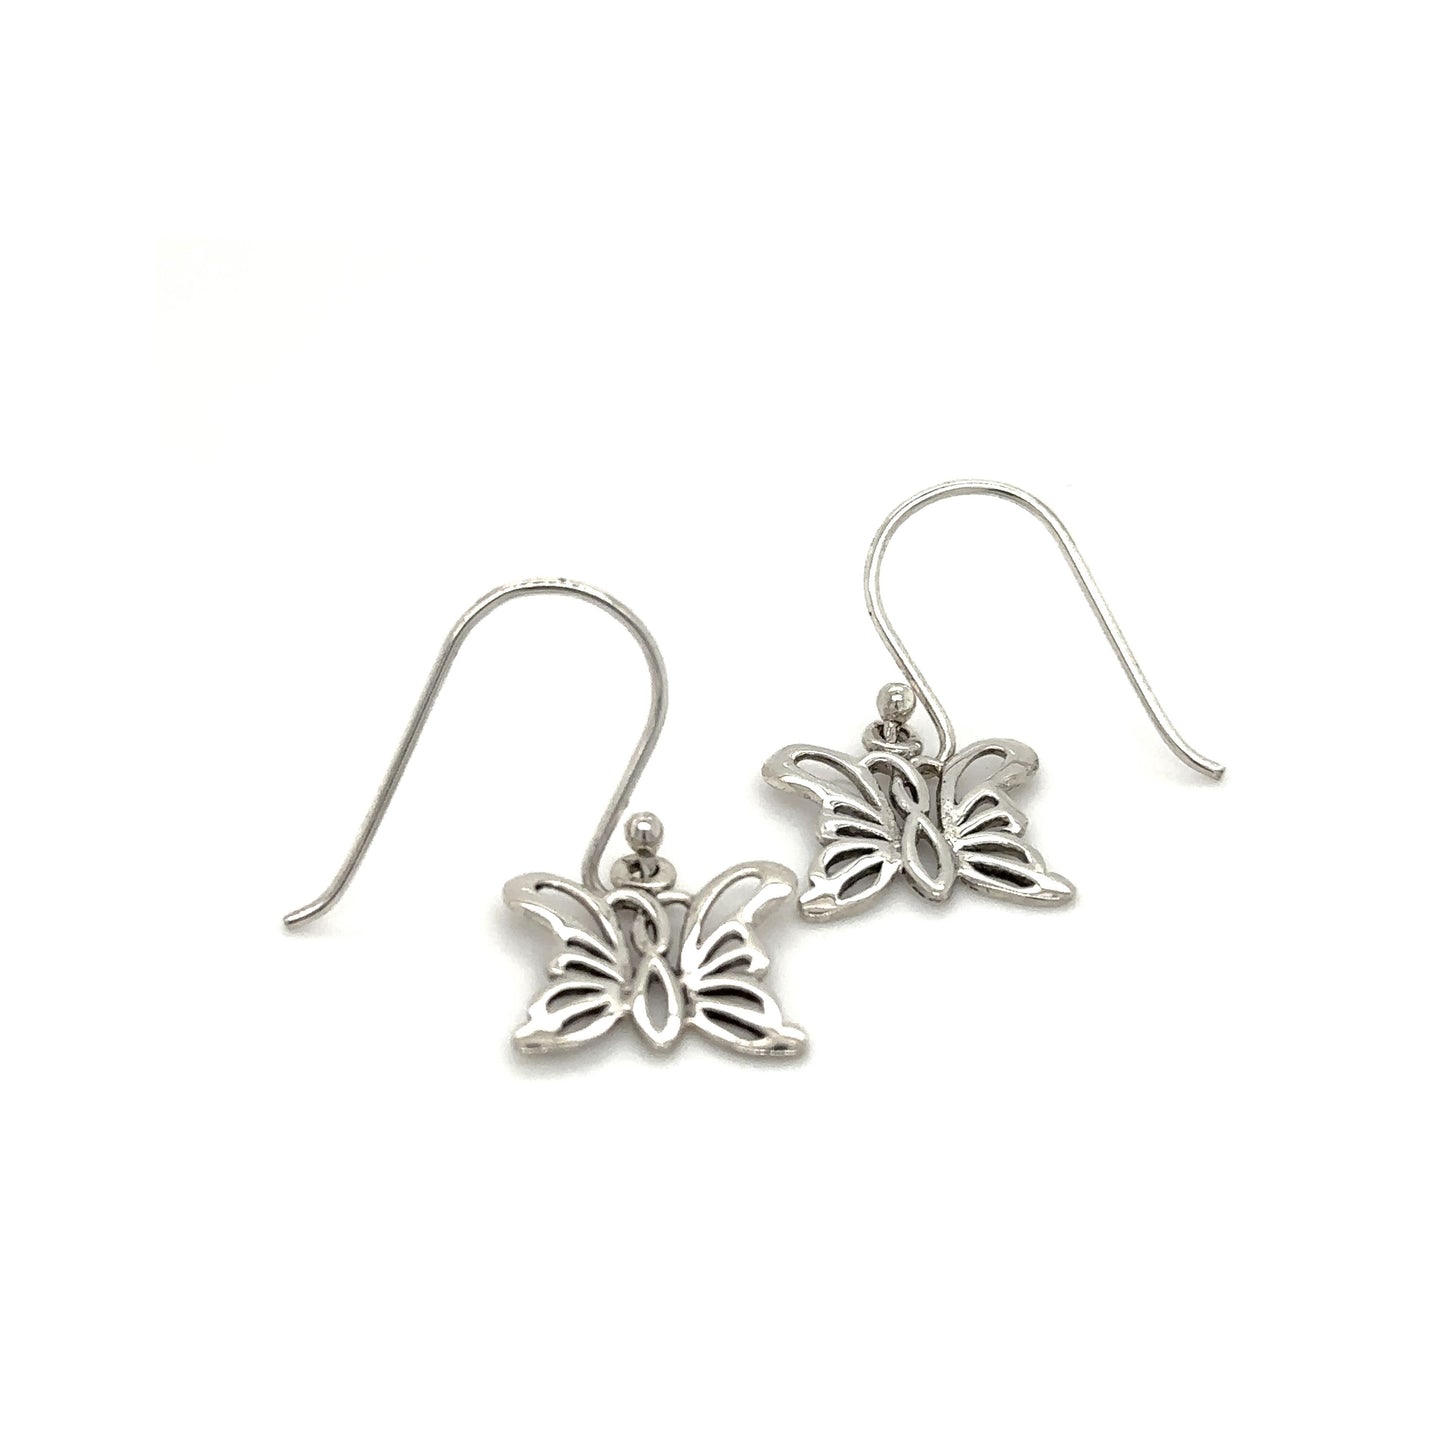 A pair of Simple Butterfly Outline Earrings by Super Silver on a white background, symbolizing hope and positivity.